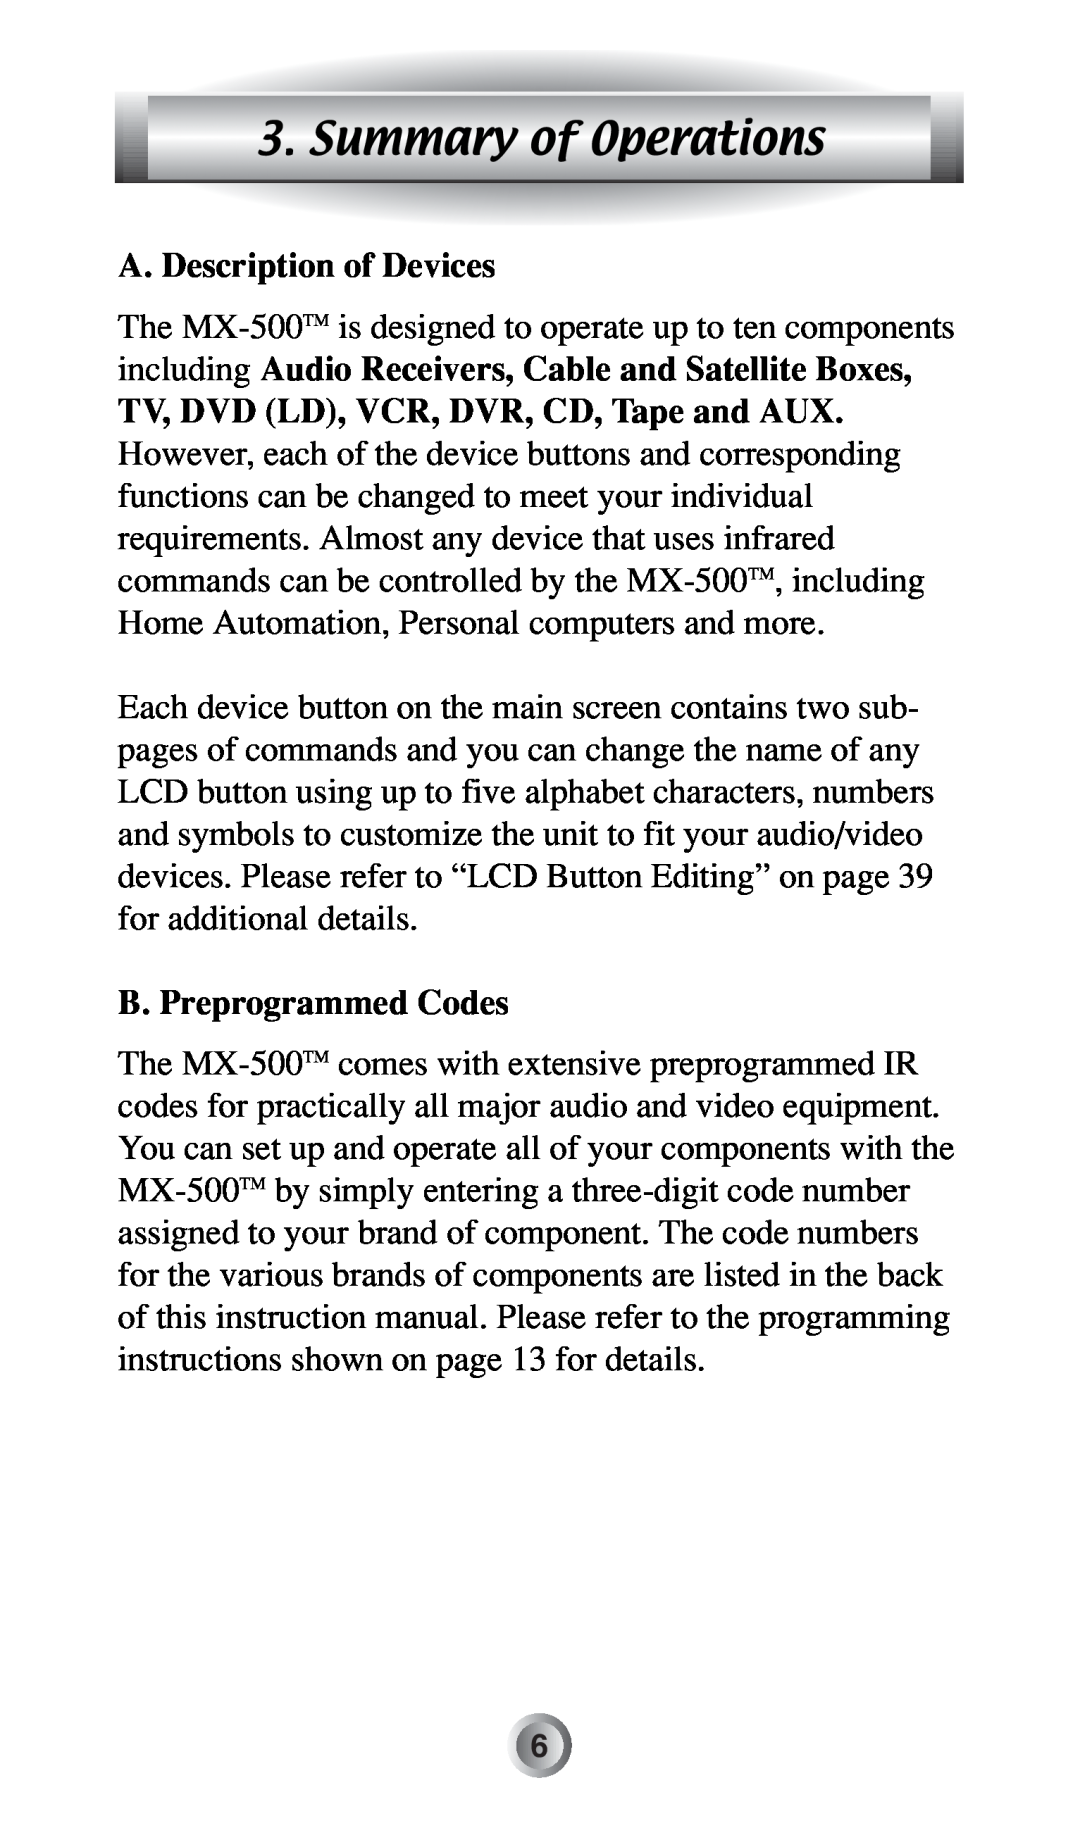 Radio Shack MX-500TM manual Summary of Operations, A. Description of Devices, TV, DVD LD, VCR, DVR, CD, Tape and AUX 